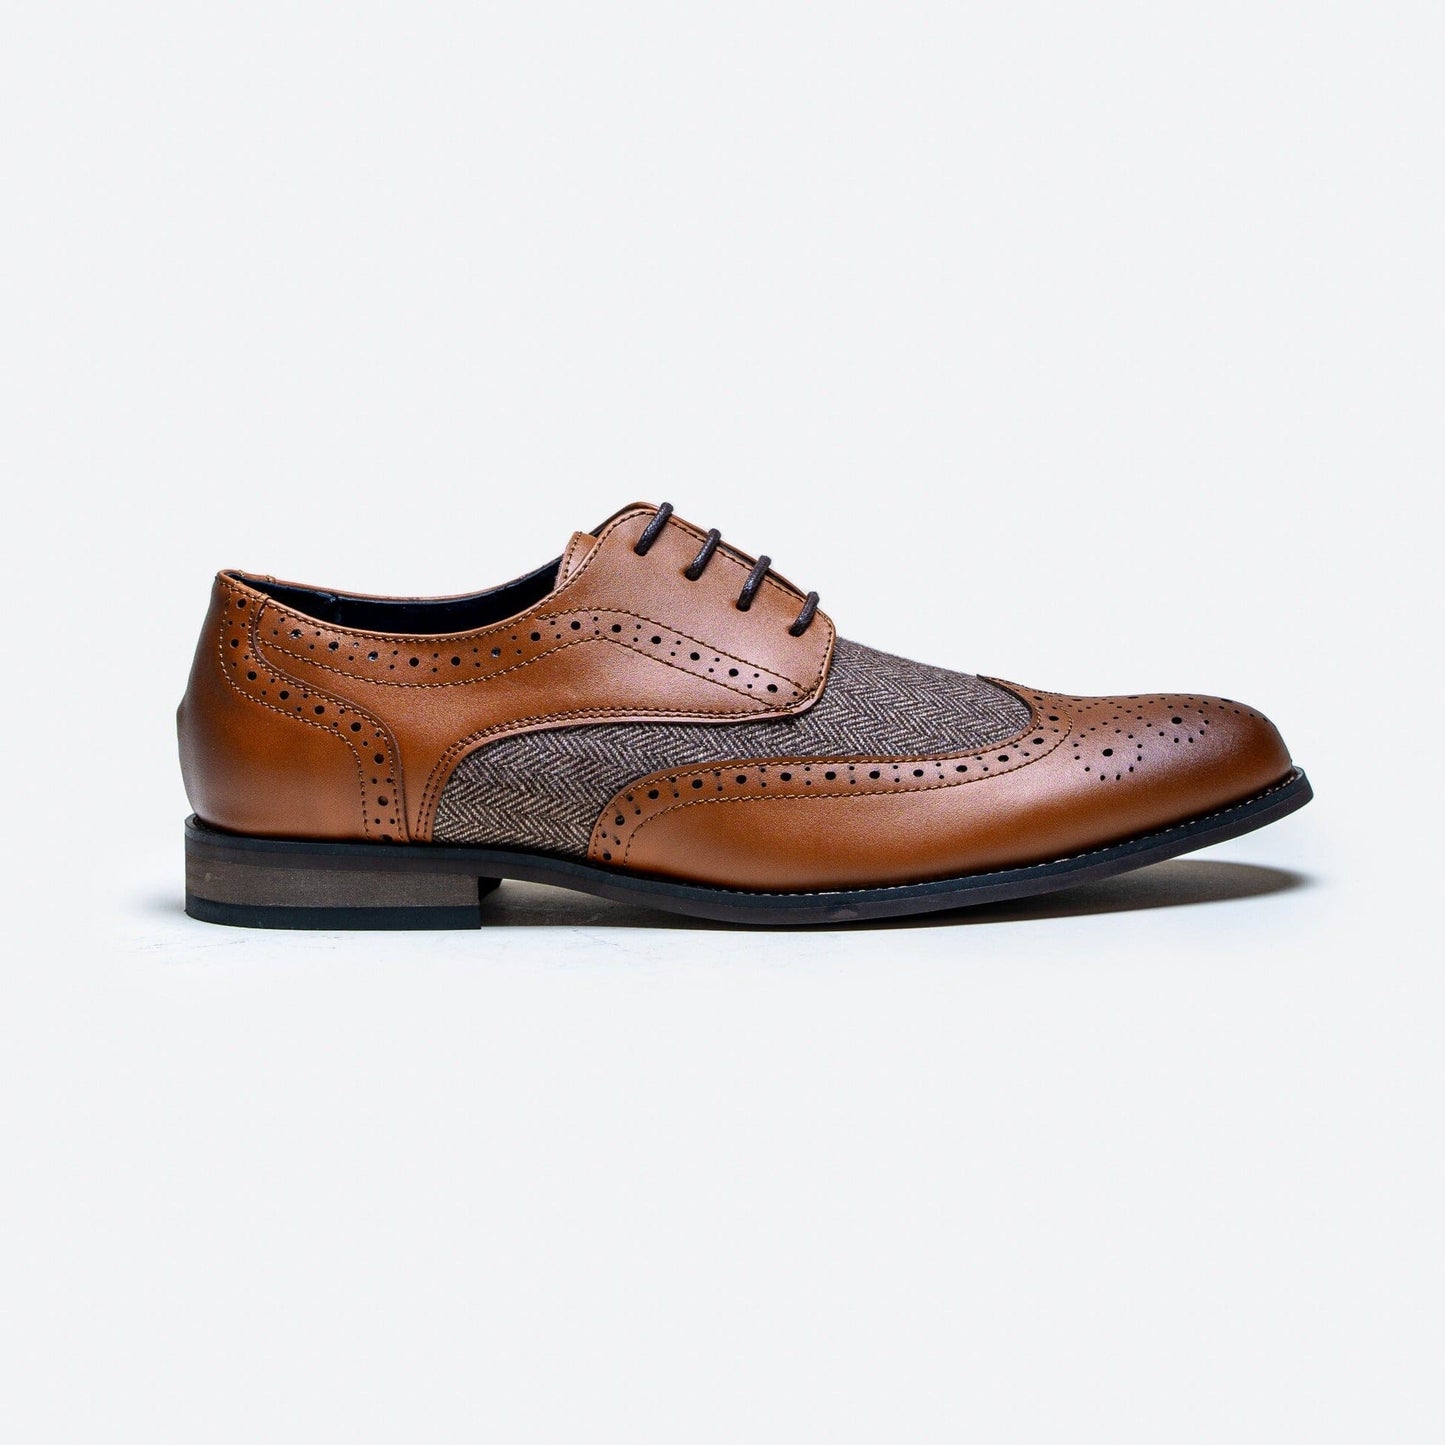 Oliver Tan Tweed Shoes - Shoes - 7 - THREADPEPPER